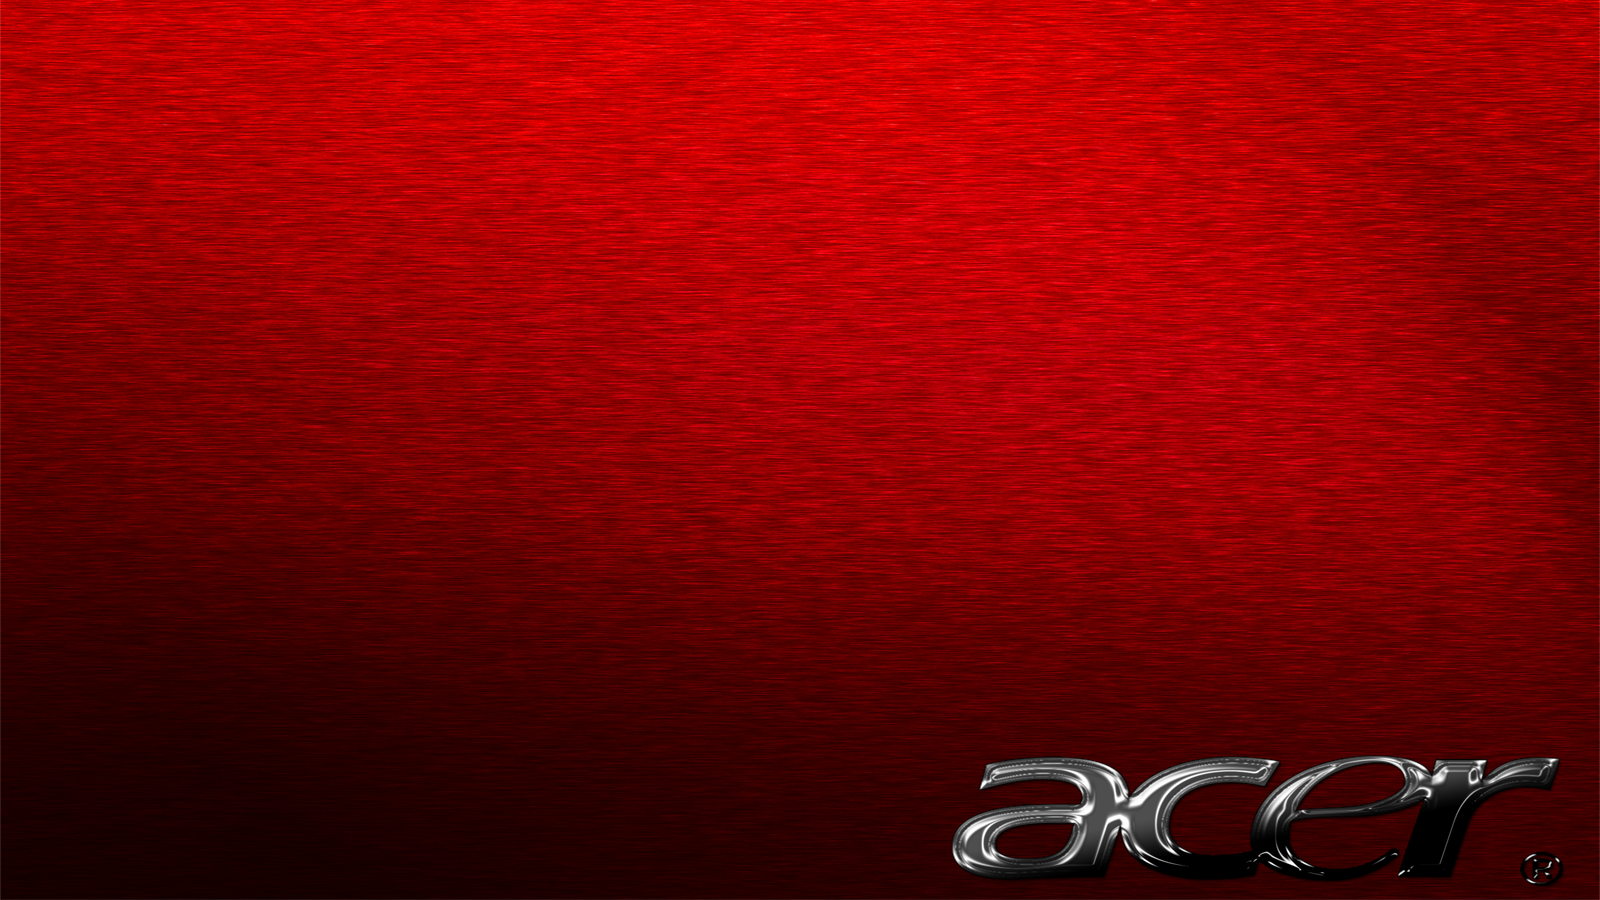 Background2 Acer Wallpaper 1600x900 Background2 Acer Wallpaper Just 1600x900